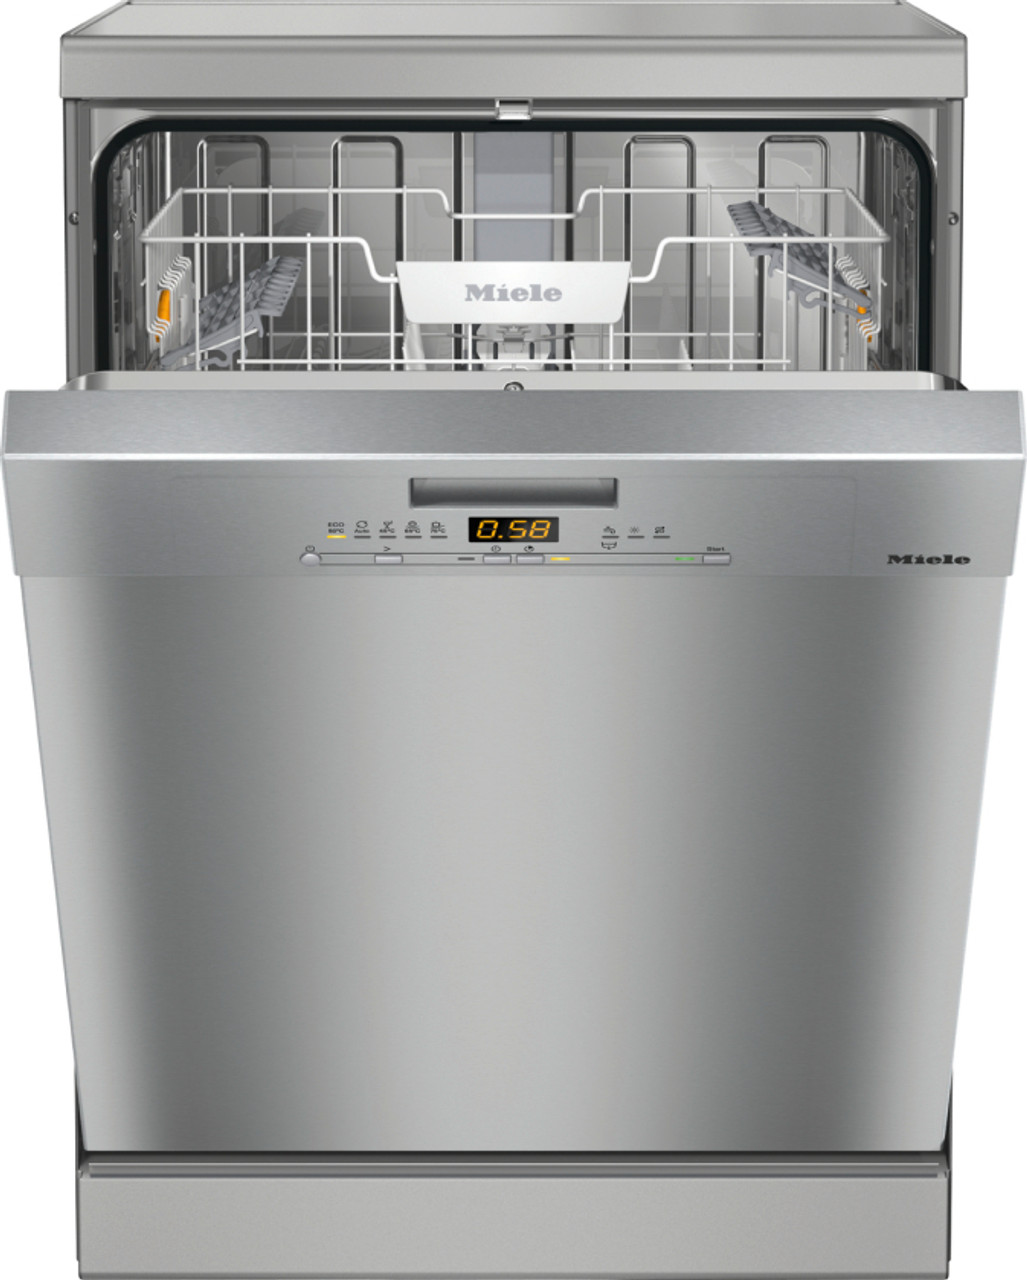 G 5000 SC CLST - Freestanding Dishwasher with Cutlery Tray - Clean Steel